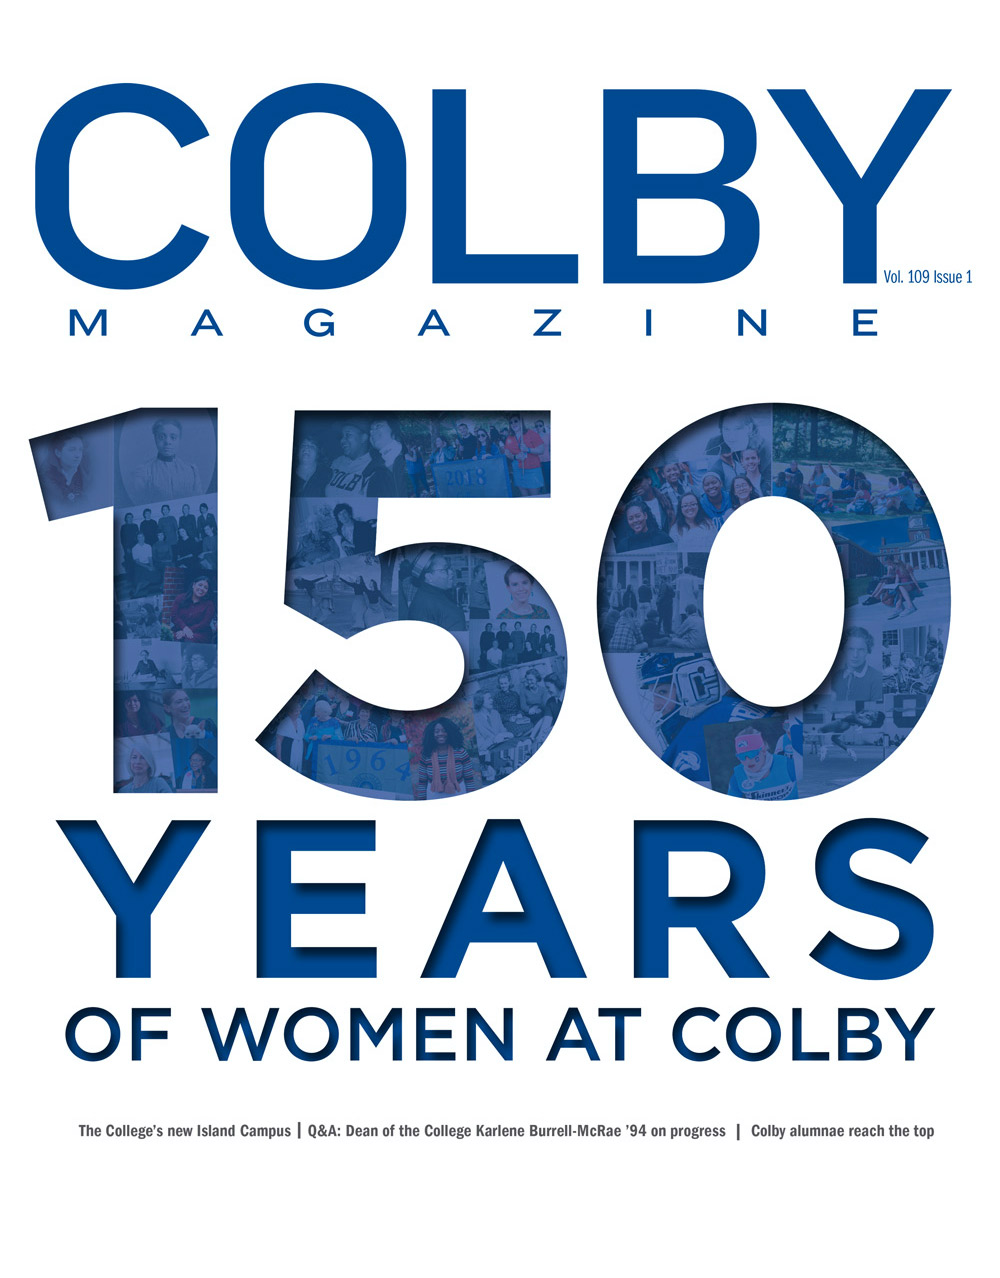 Colby Magazine Vol. 109 Issue 1 cover